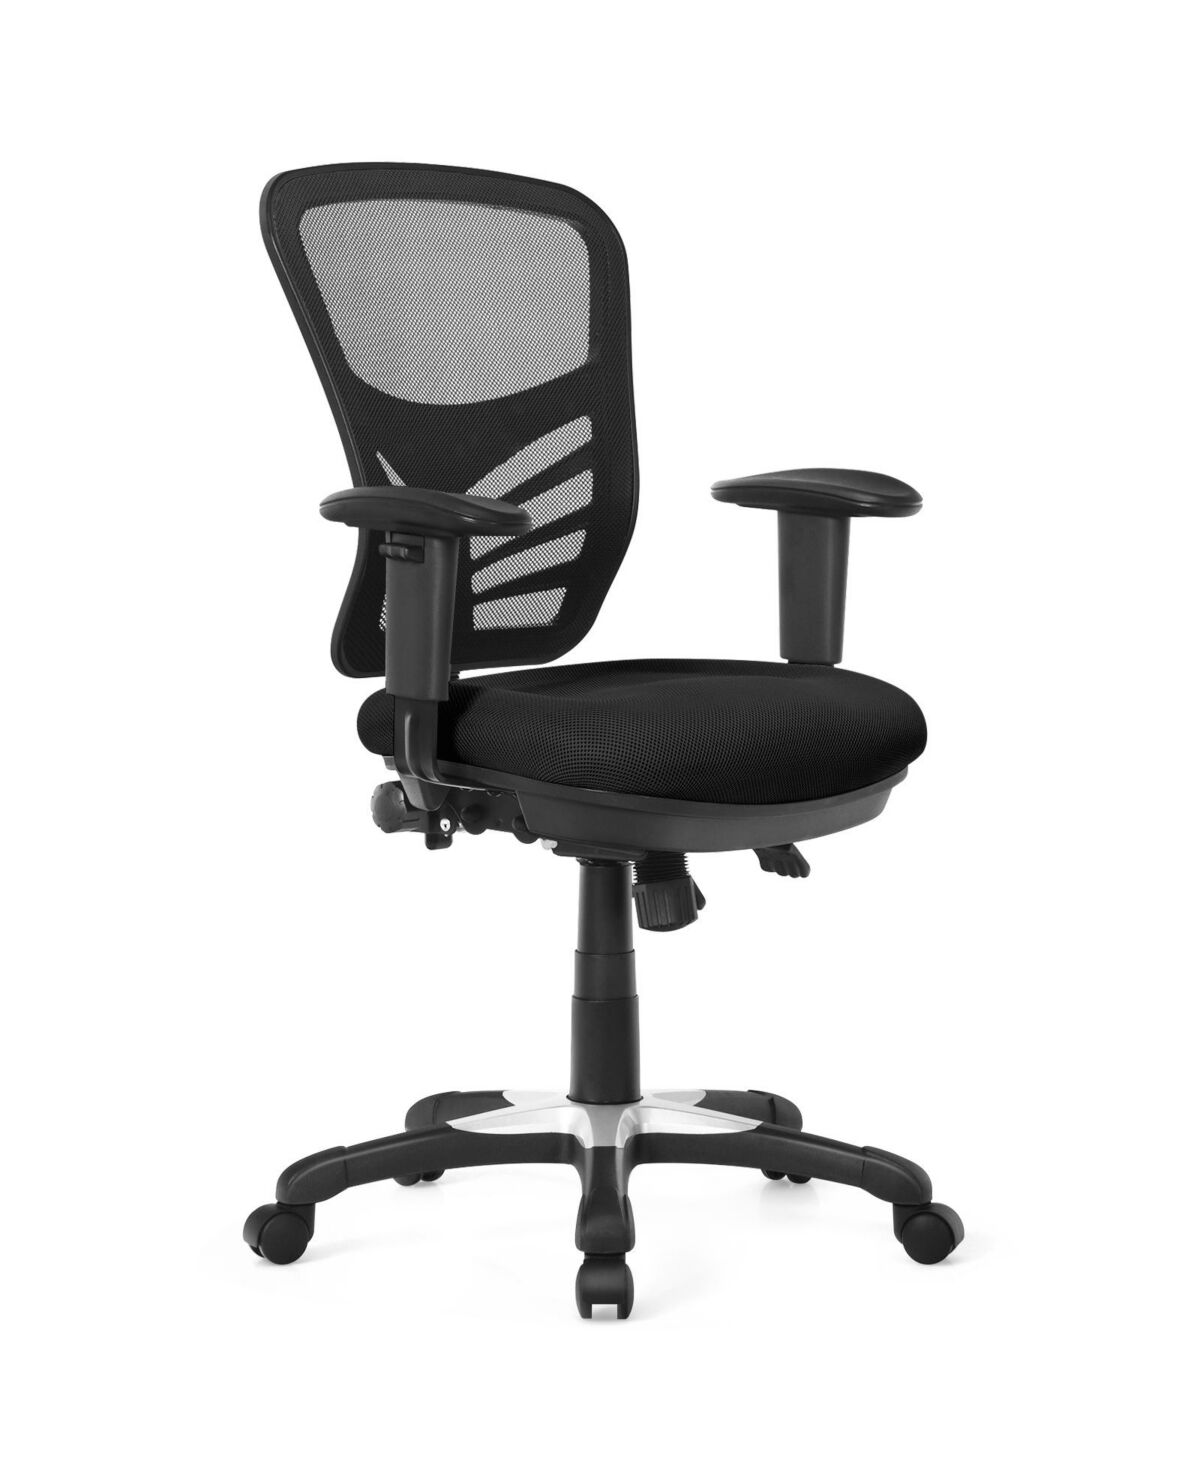 Slickblue Ergonomic Mesh Office Chair with Adjustable Back Height and Armrests - Black